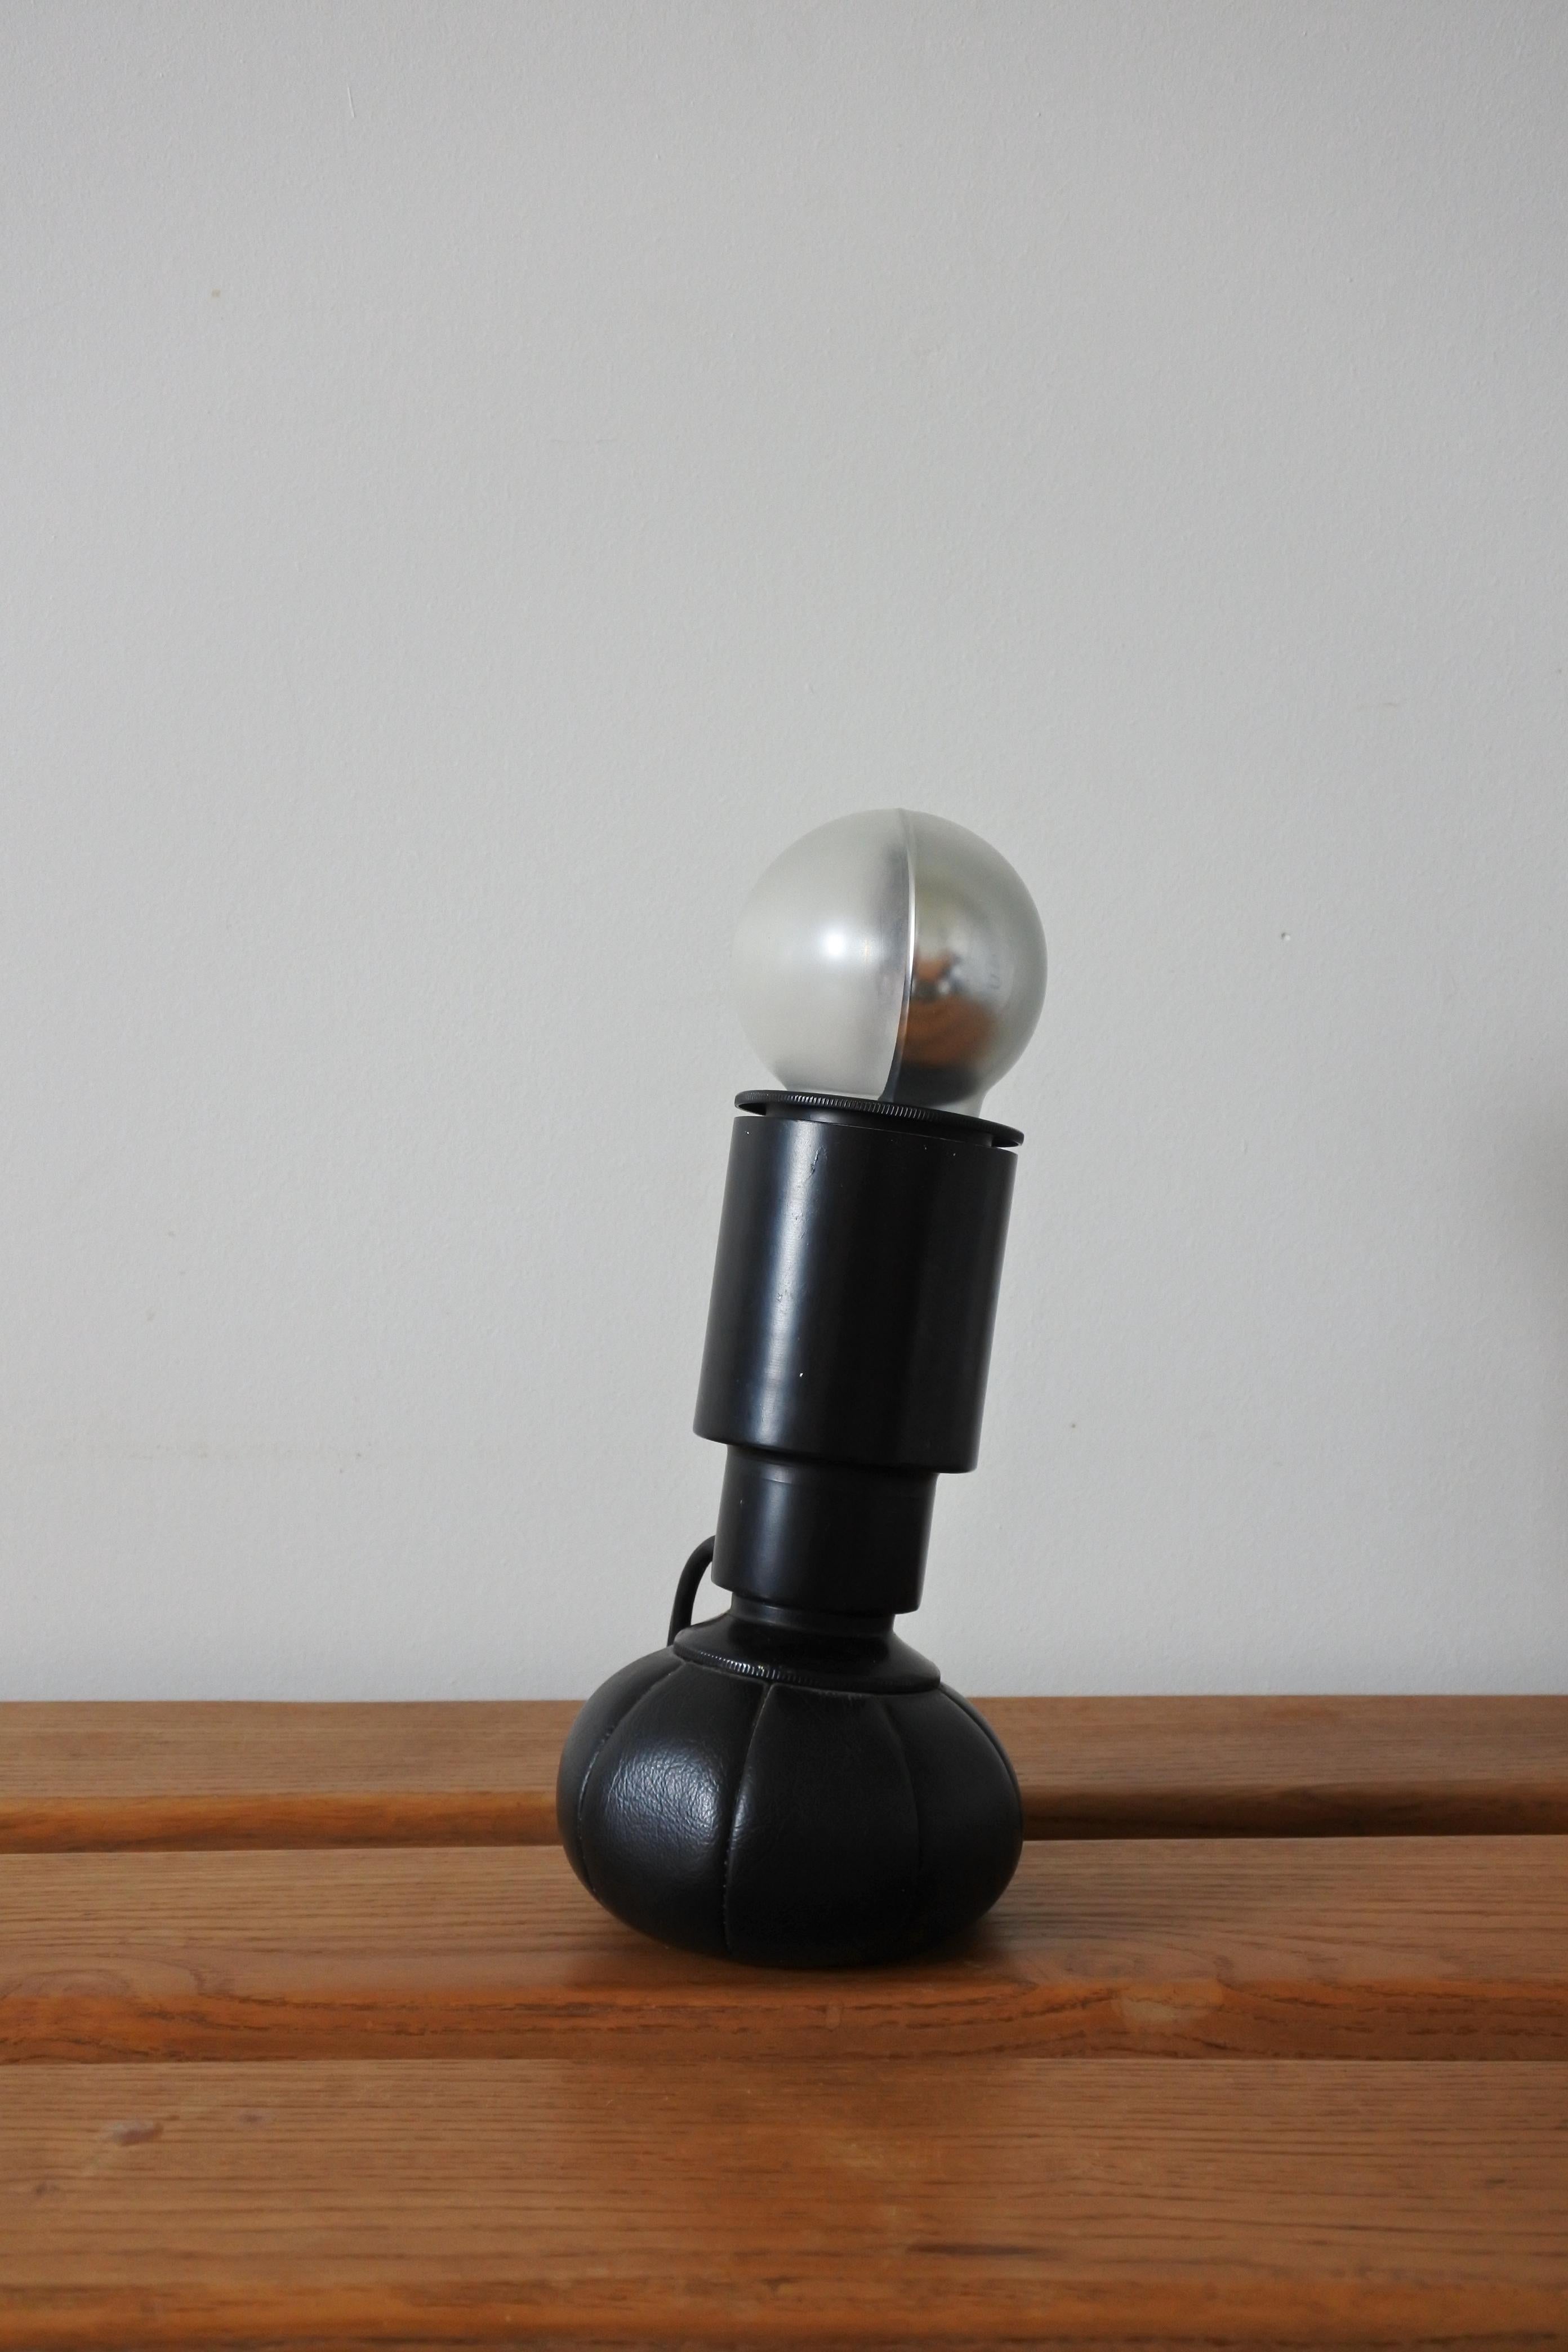 Early table lamp by Gino Sarfatti & Arteluce.
Model 600/C designed in 1966, made in Italy.
Black lacquered aluminum, based in black leather filled with lead buckshot, adjustable in all directions.


Full original edition from the 1960s, labeled